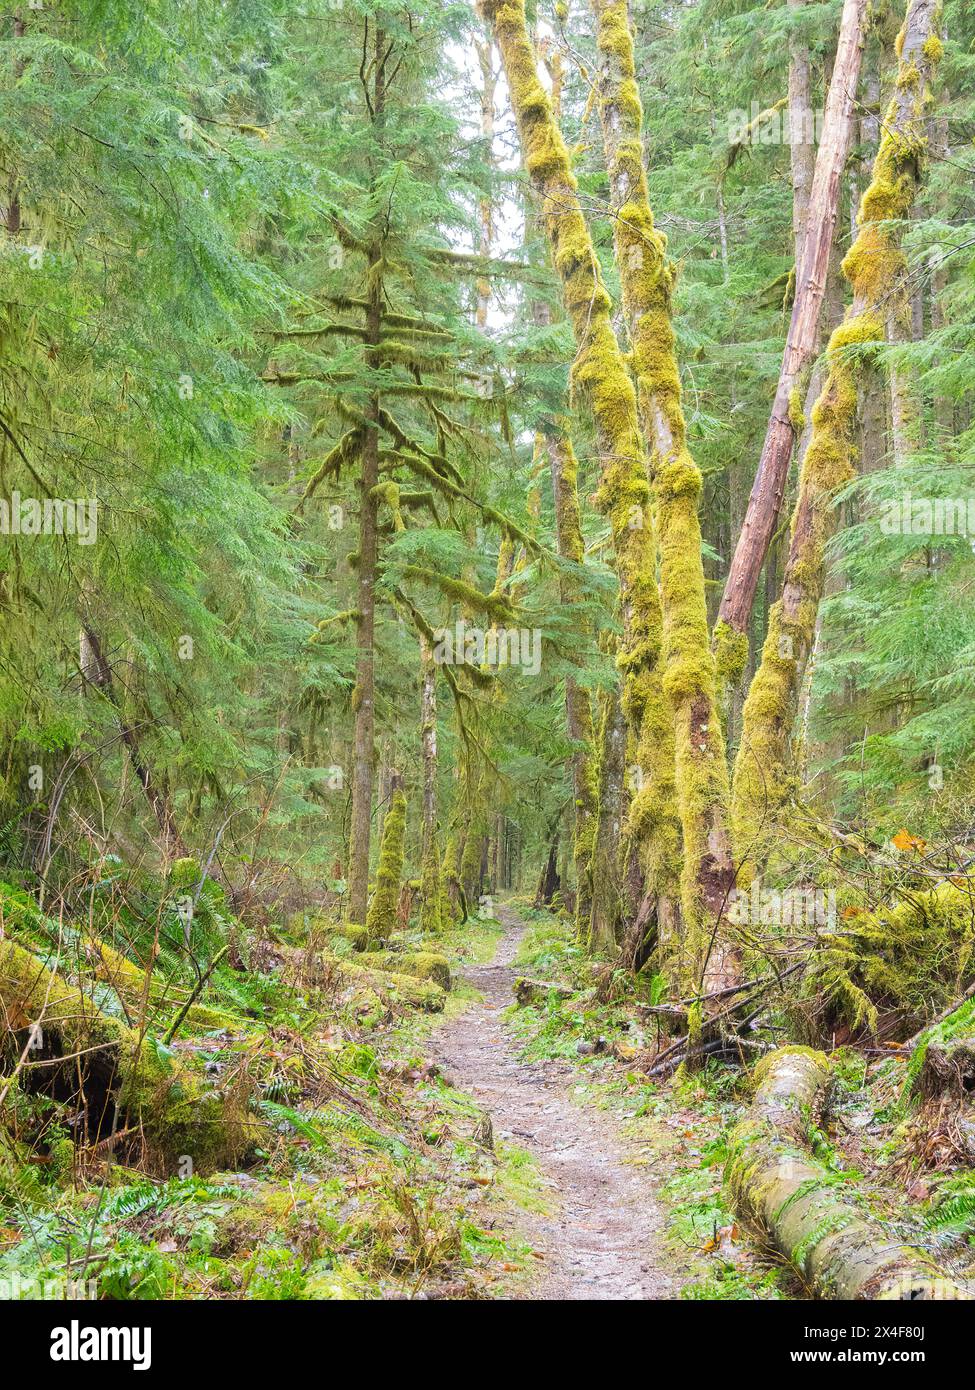 USA, Washington State. Central Cascades, Trail through moss and lichen covered alder and fir trees Stock Photo